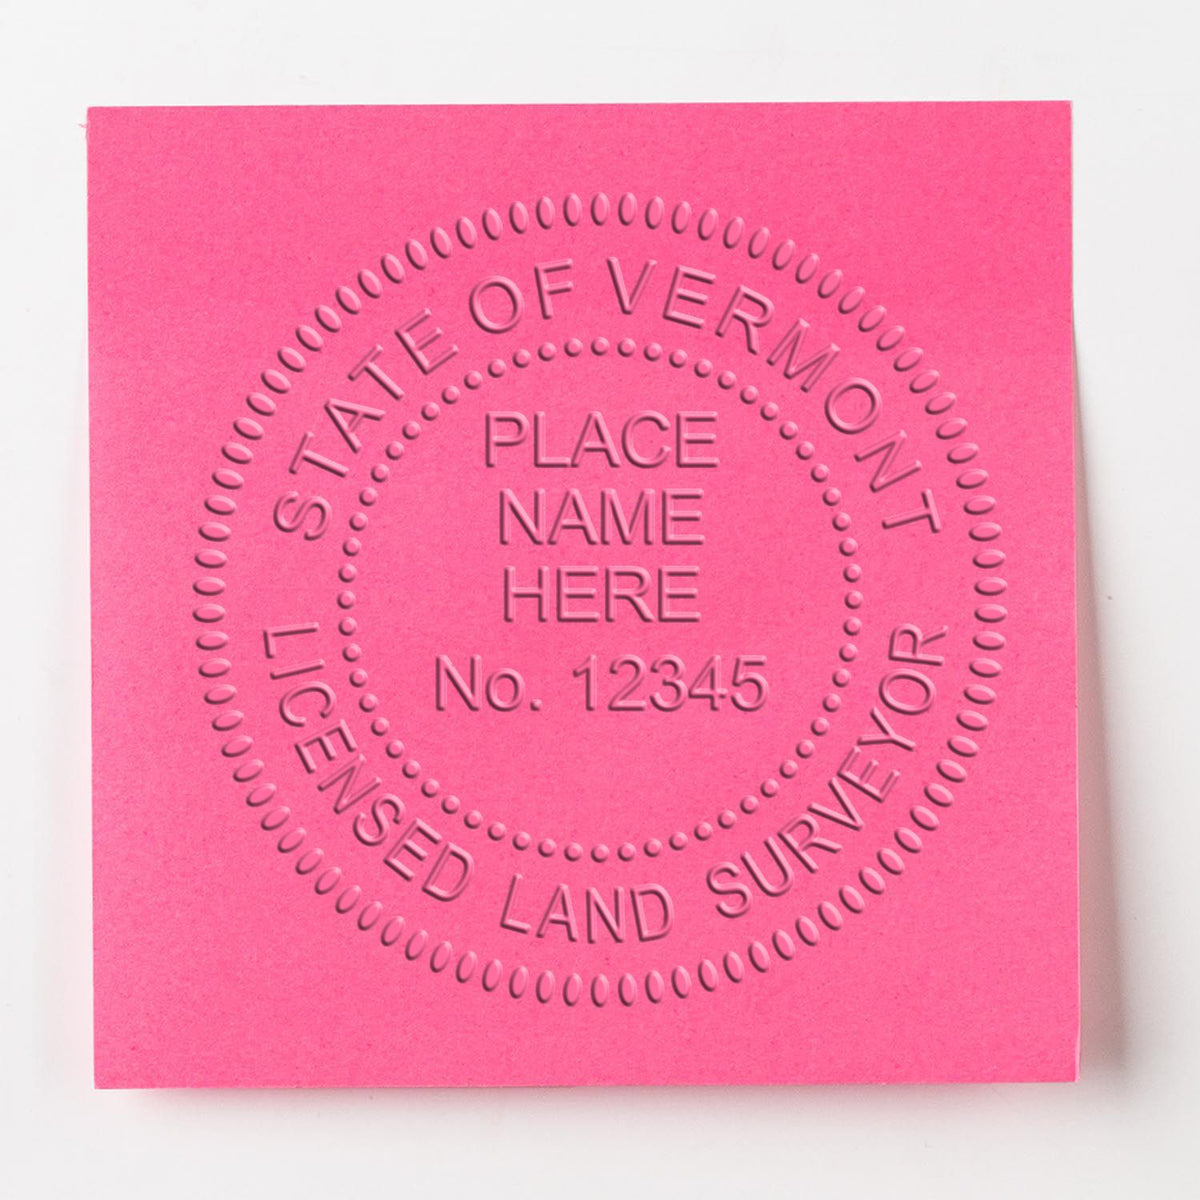 An alternative view of the Hybrid Vermont Land Surveyor Seal stamped on a sheet of paper showing the image in use